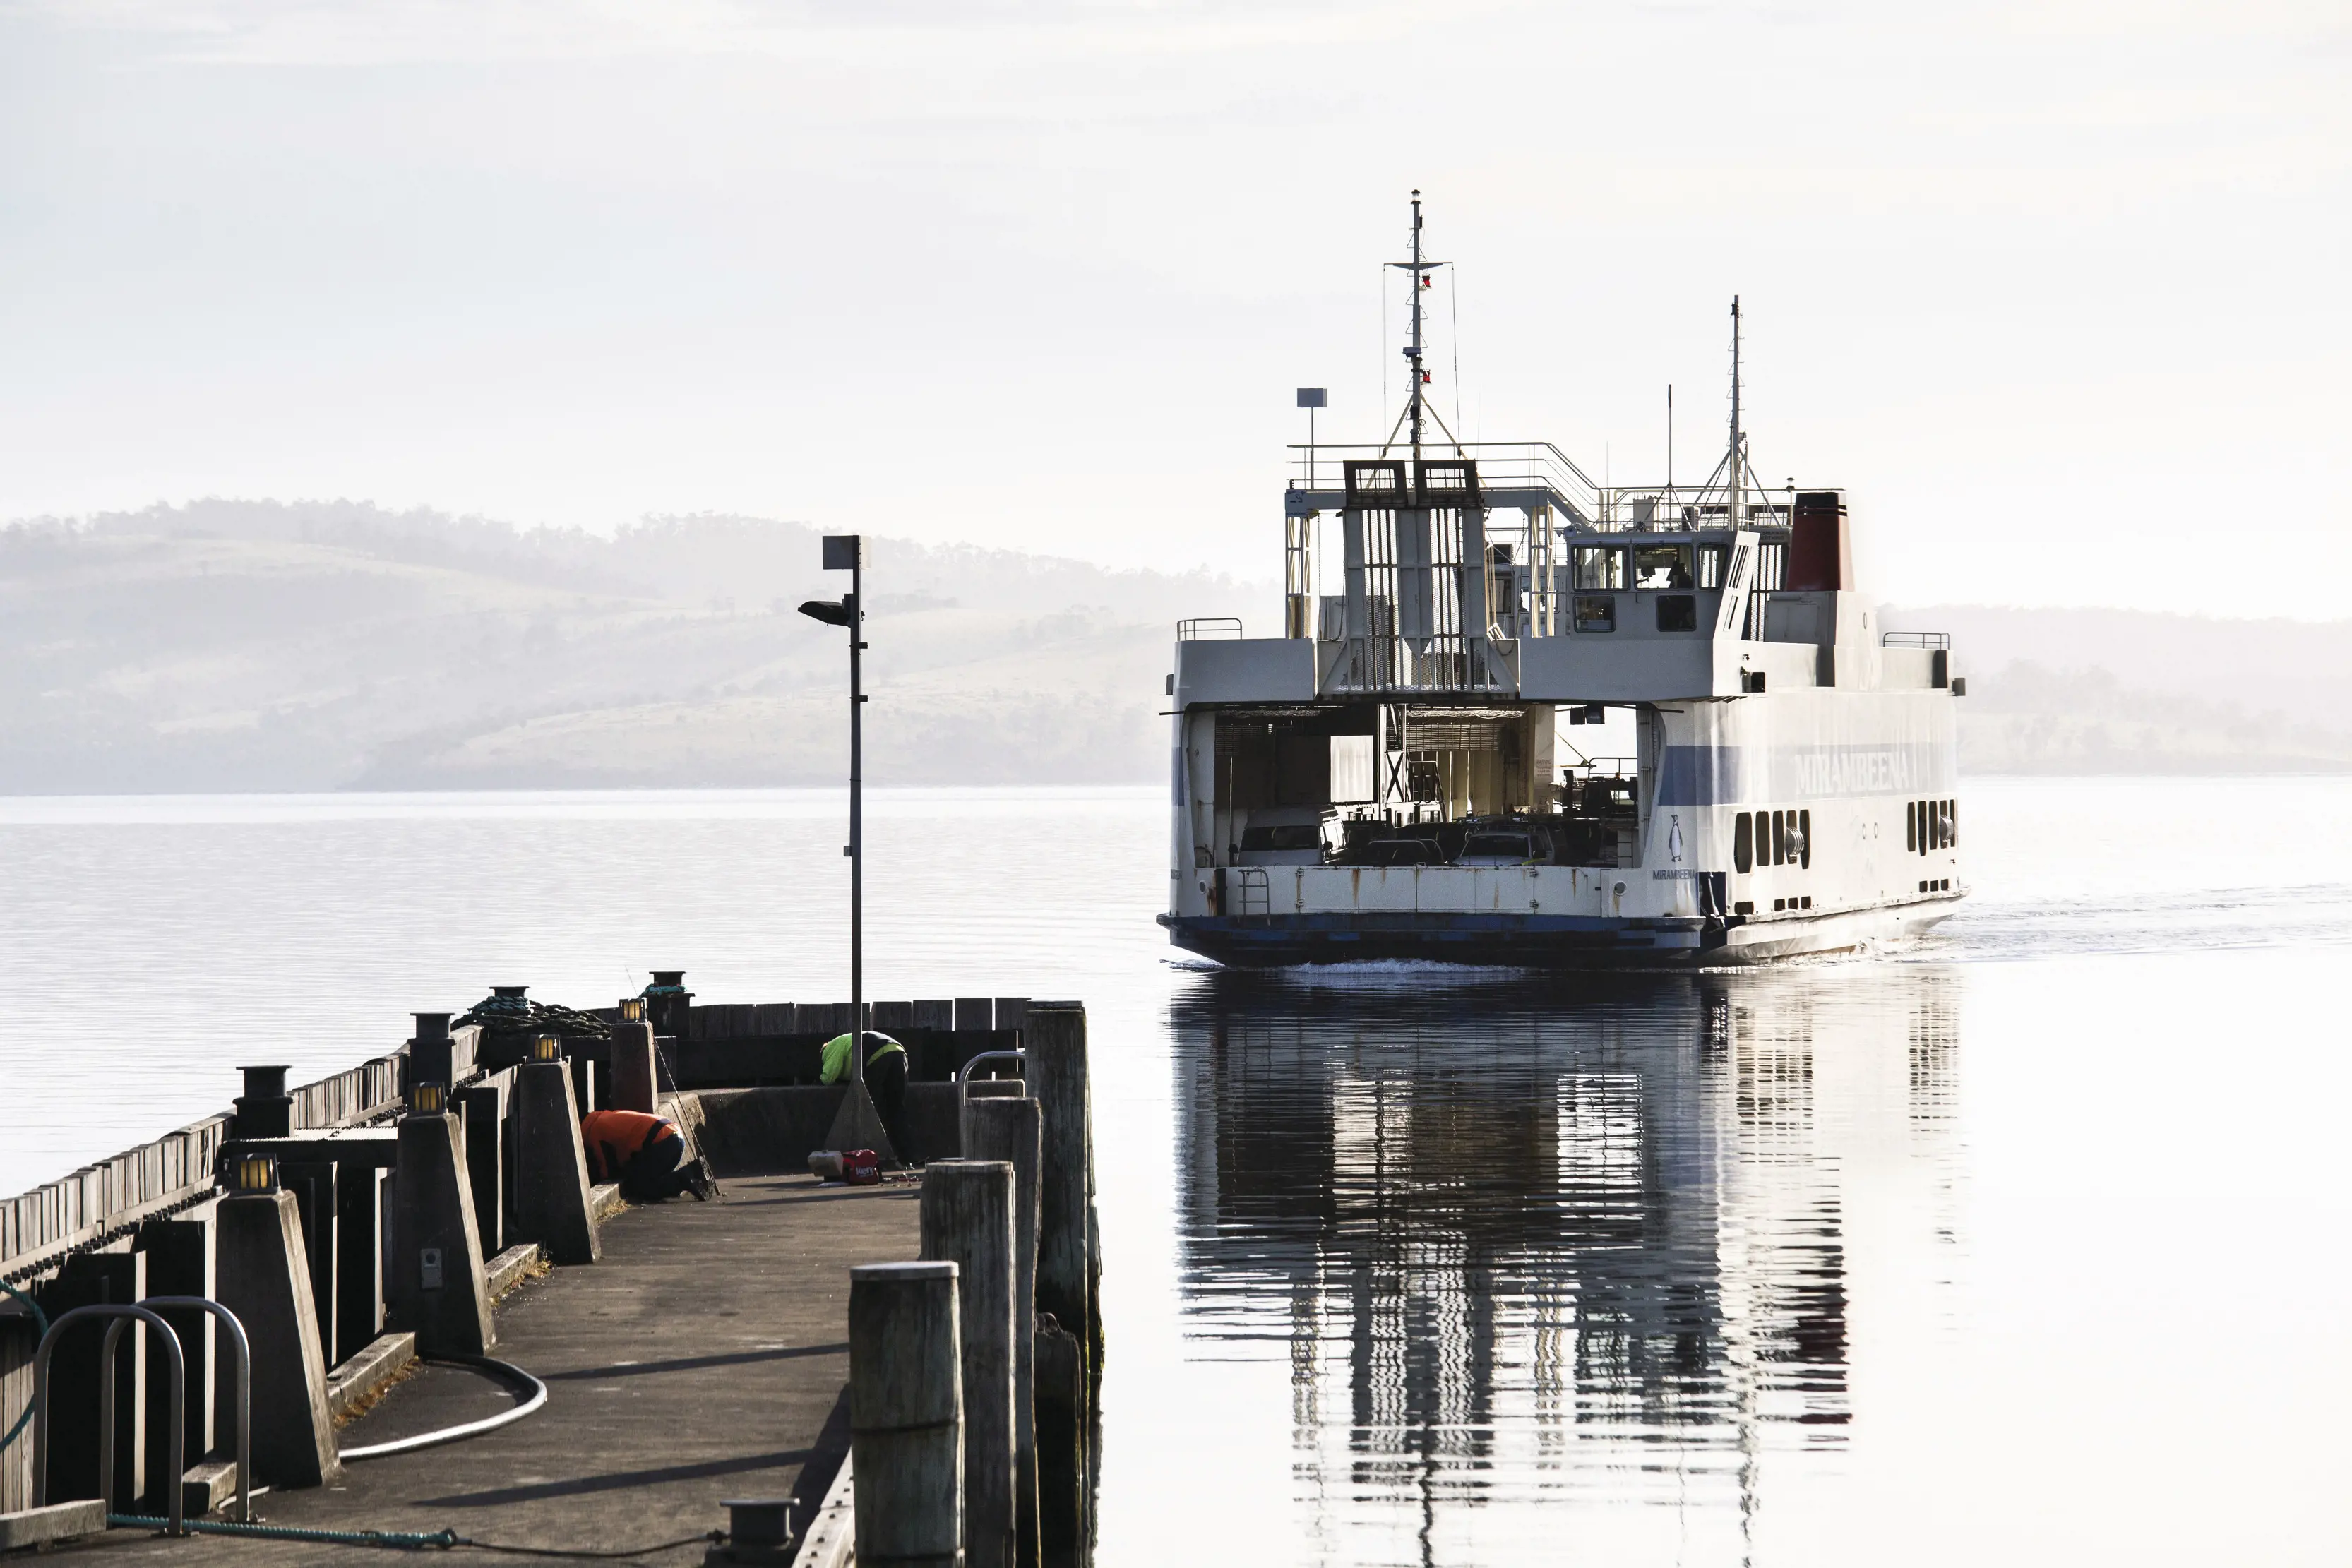 The Bruny Island Ferry, Mirambeena, departs from the seaside township of Kettering.